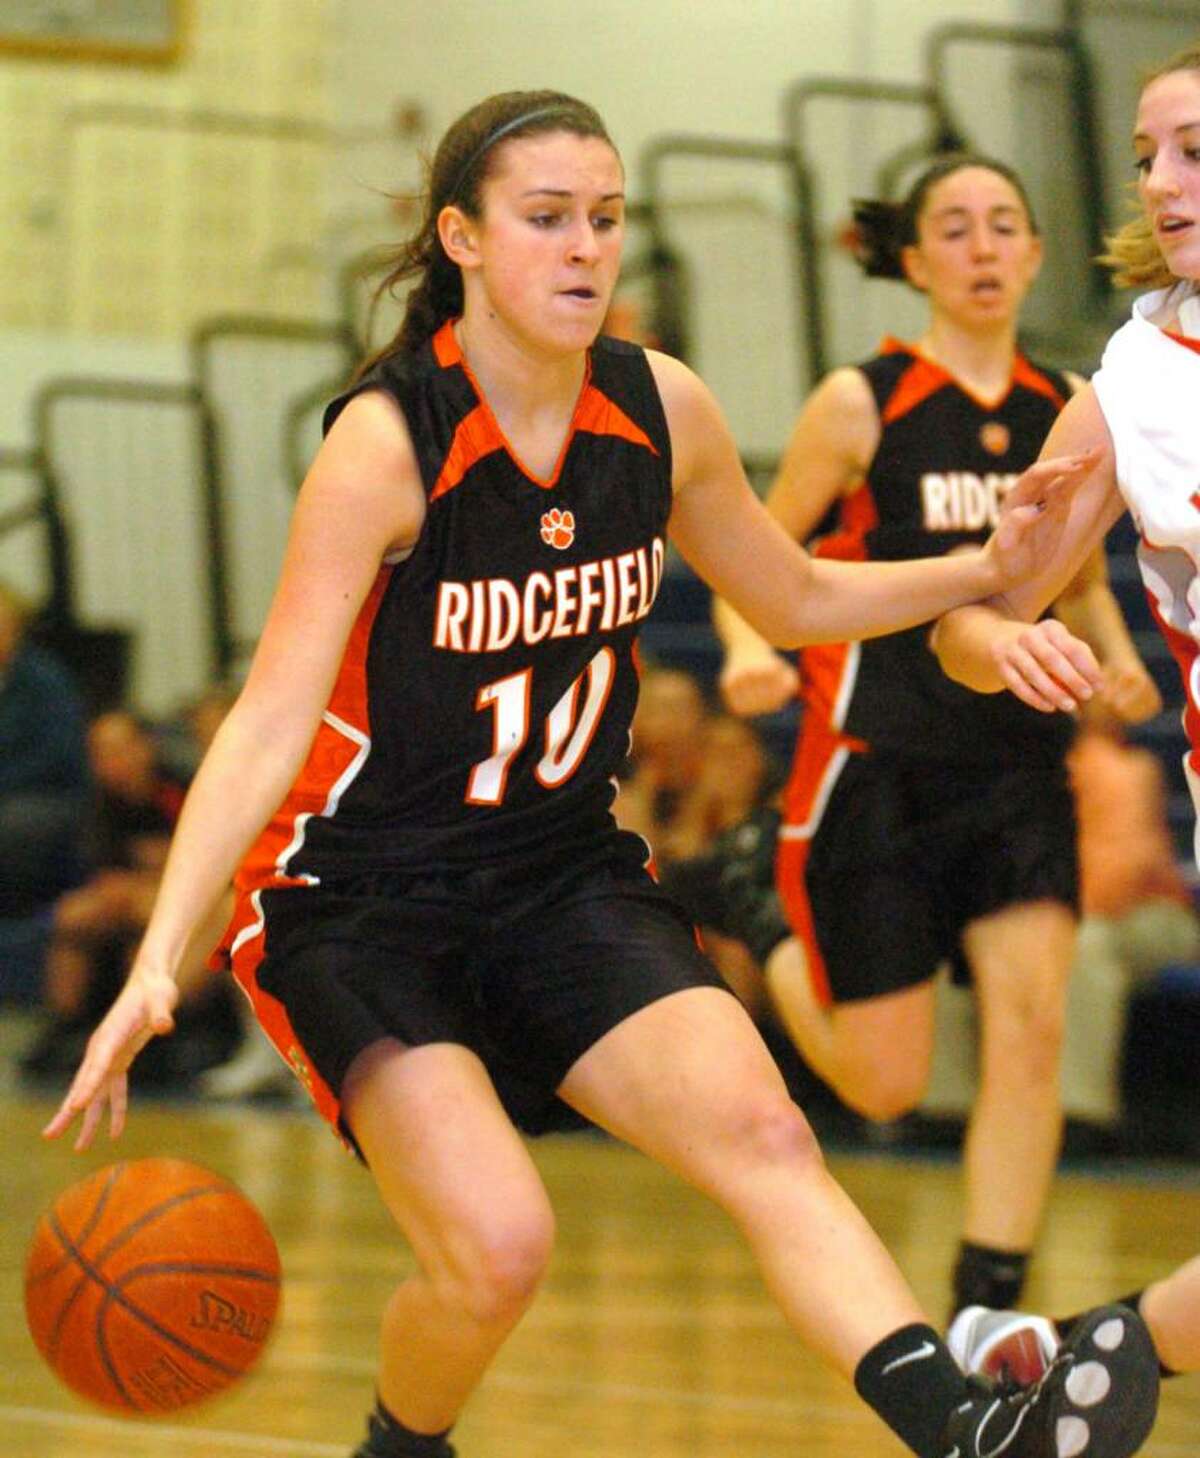 Ridgefield's 10, Kathryn Cholko heads up-court during the basketball game against Norwich Free Academy at Southington Wednesday, March 10, 2010.